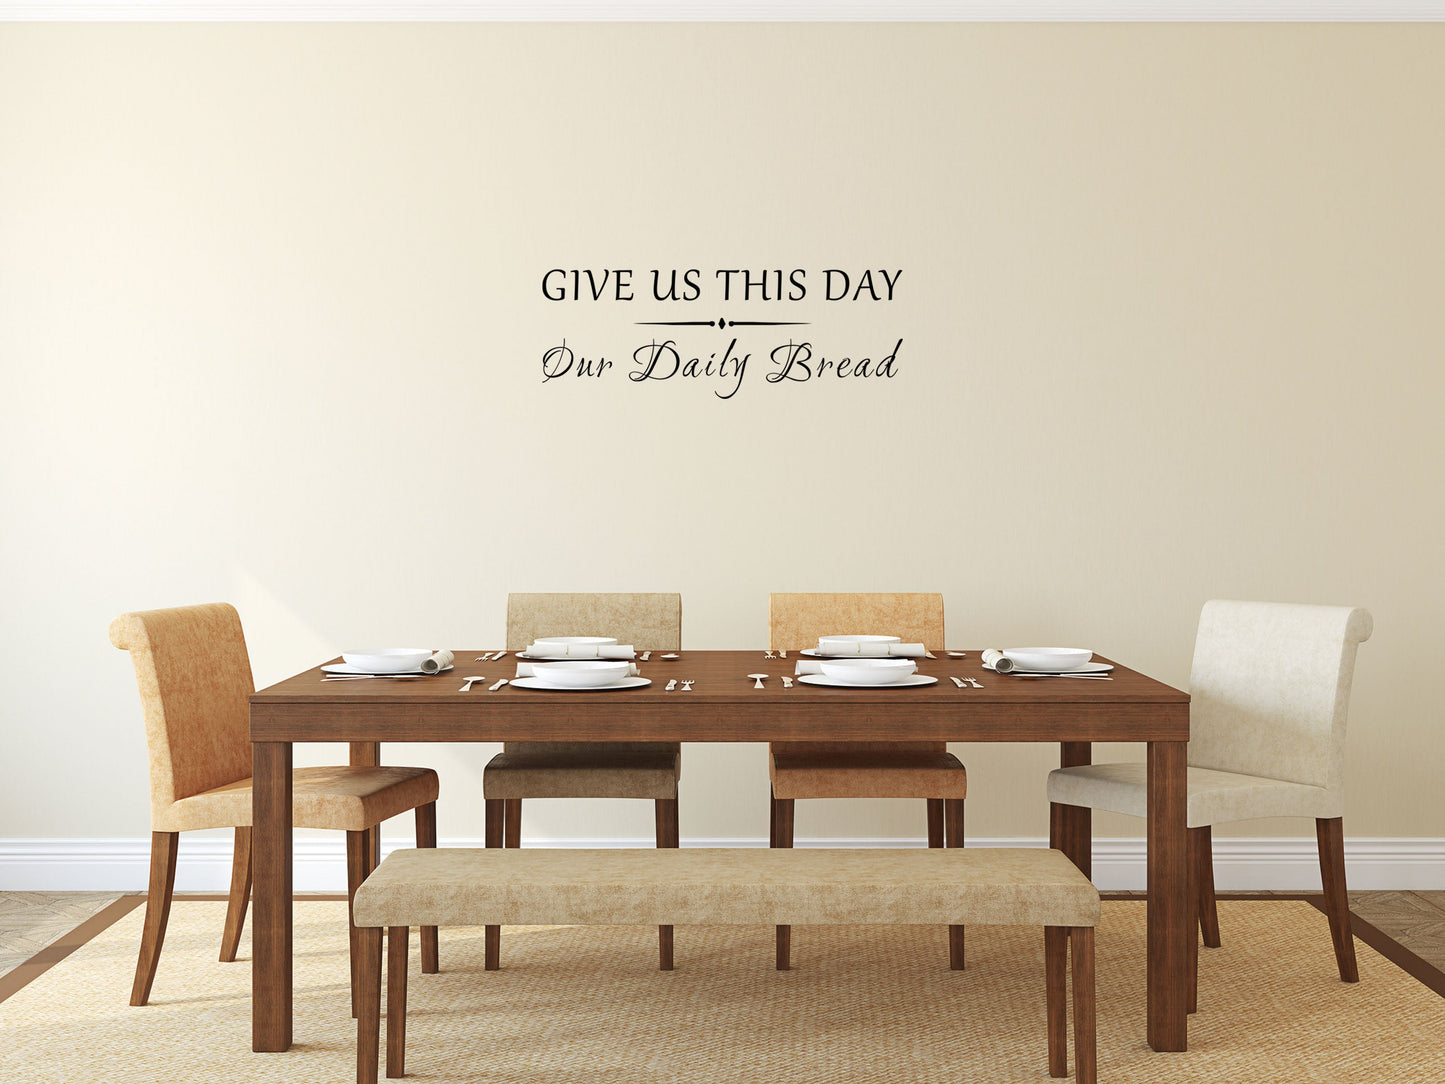 Give Us This Day Our Daily Bread - Inspirational Wall Decals Vinyl Wall Decal Inspirational Wall Signs 